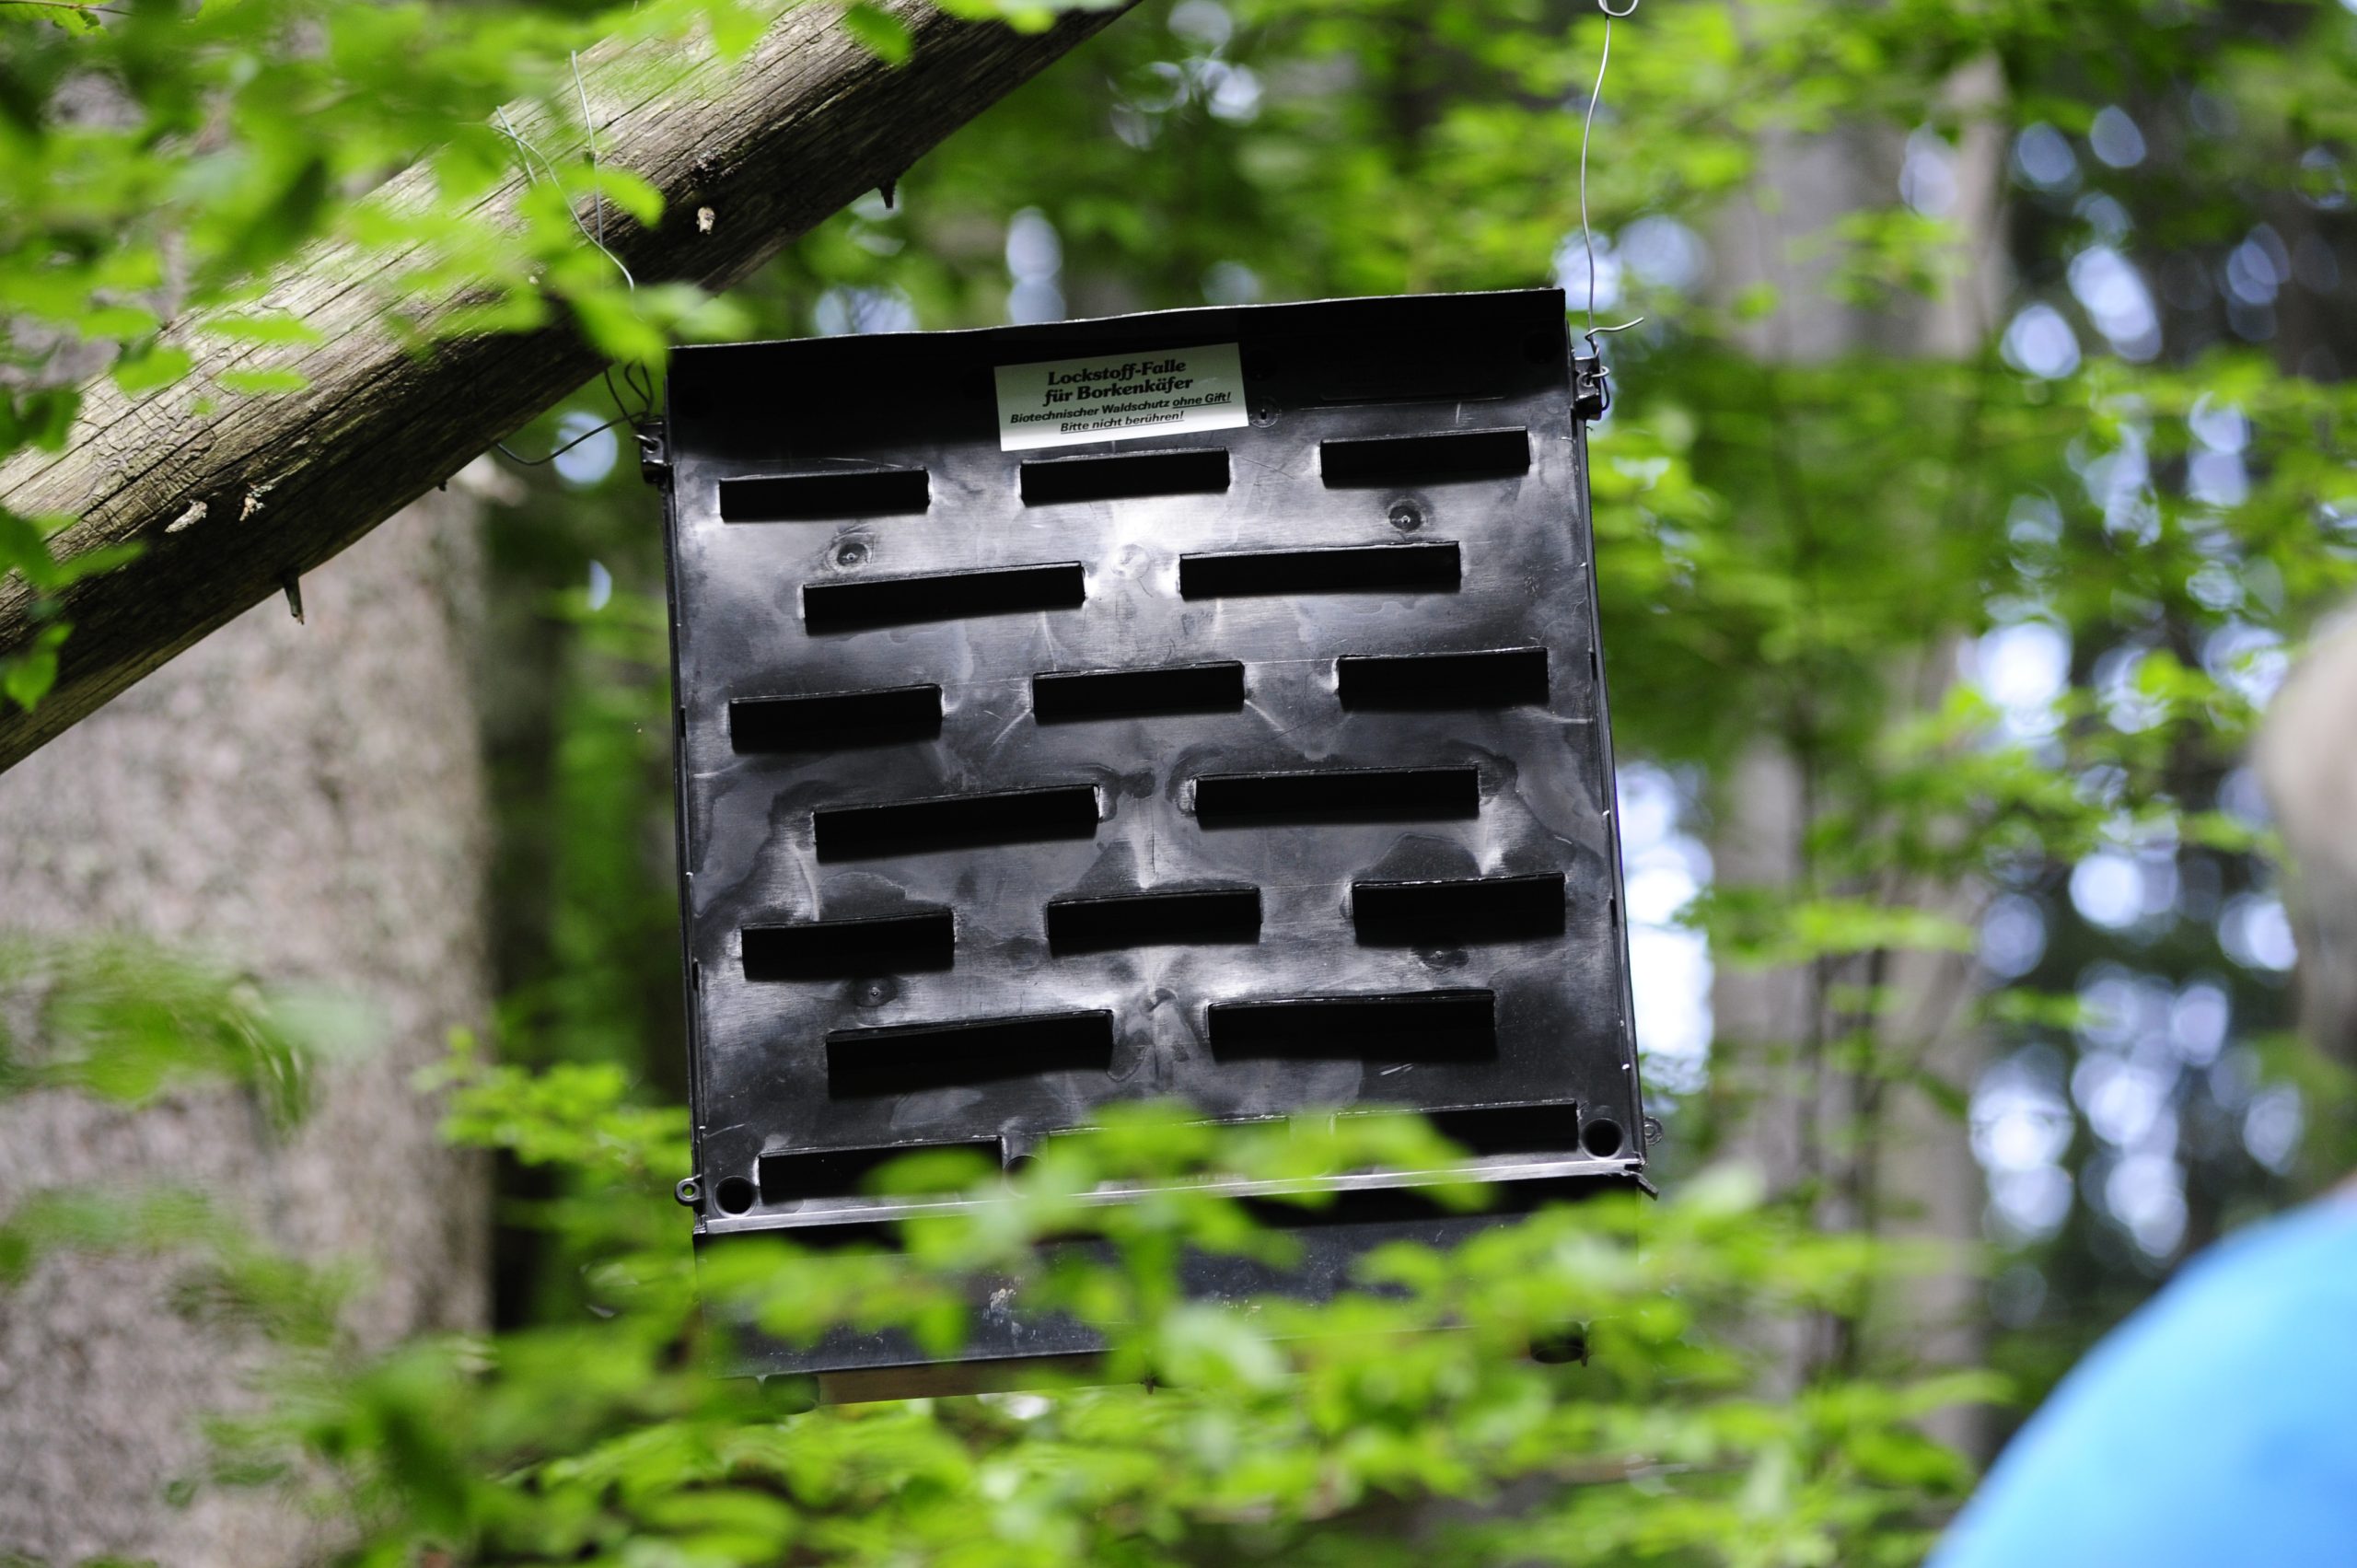 a pheromone trap for trees affected by a pest infestation